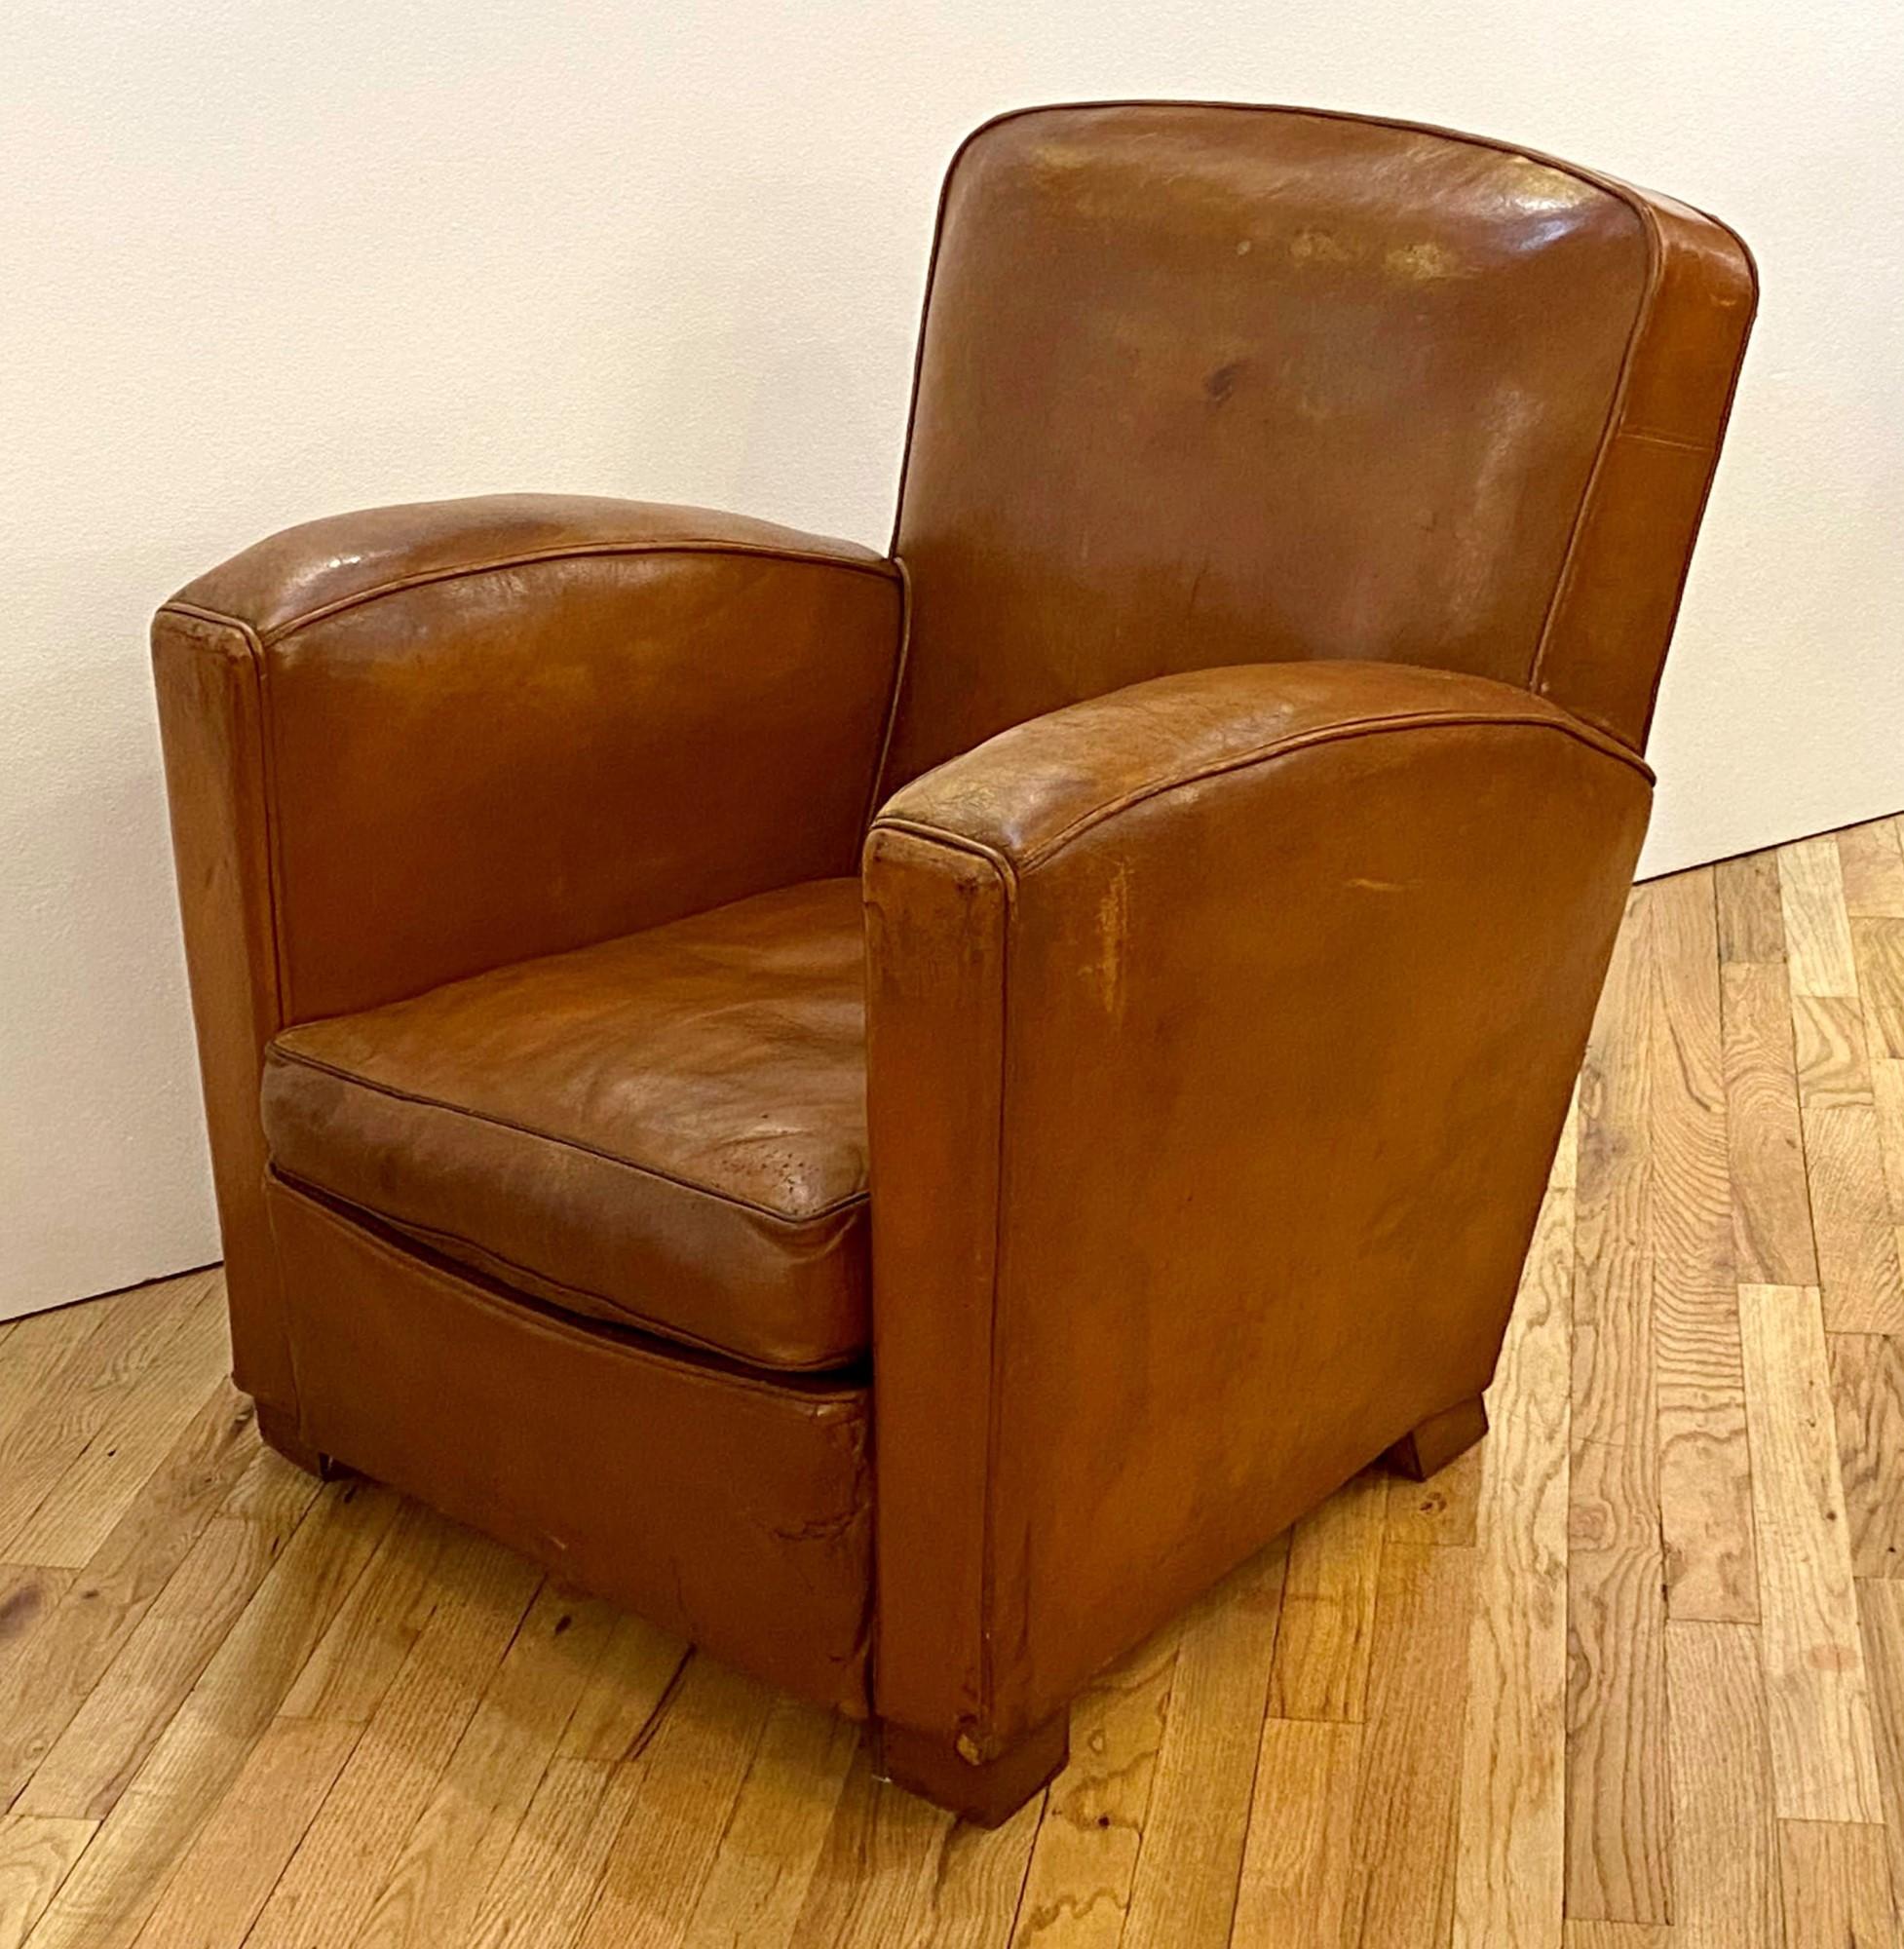 Refurbished Art Deco brown leather French single club chair from the 1930s. There is minor wear. One available. This can be seen at our 333 West 52nd St location in the Theater District West of Manhattan.